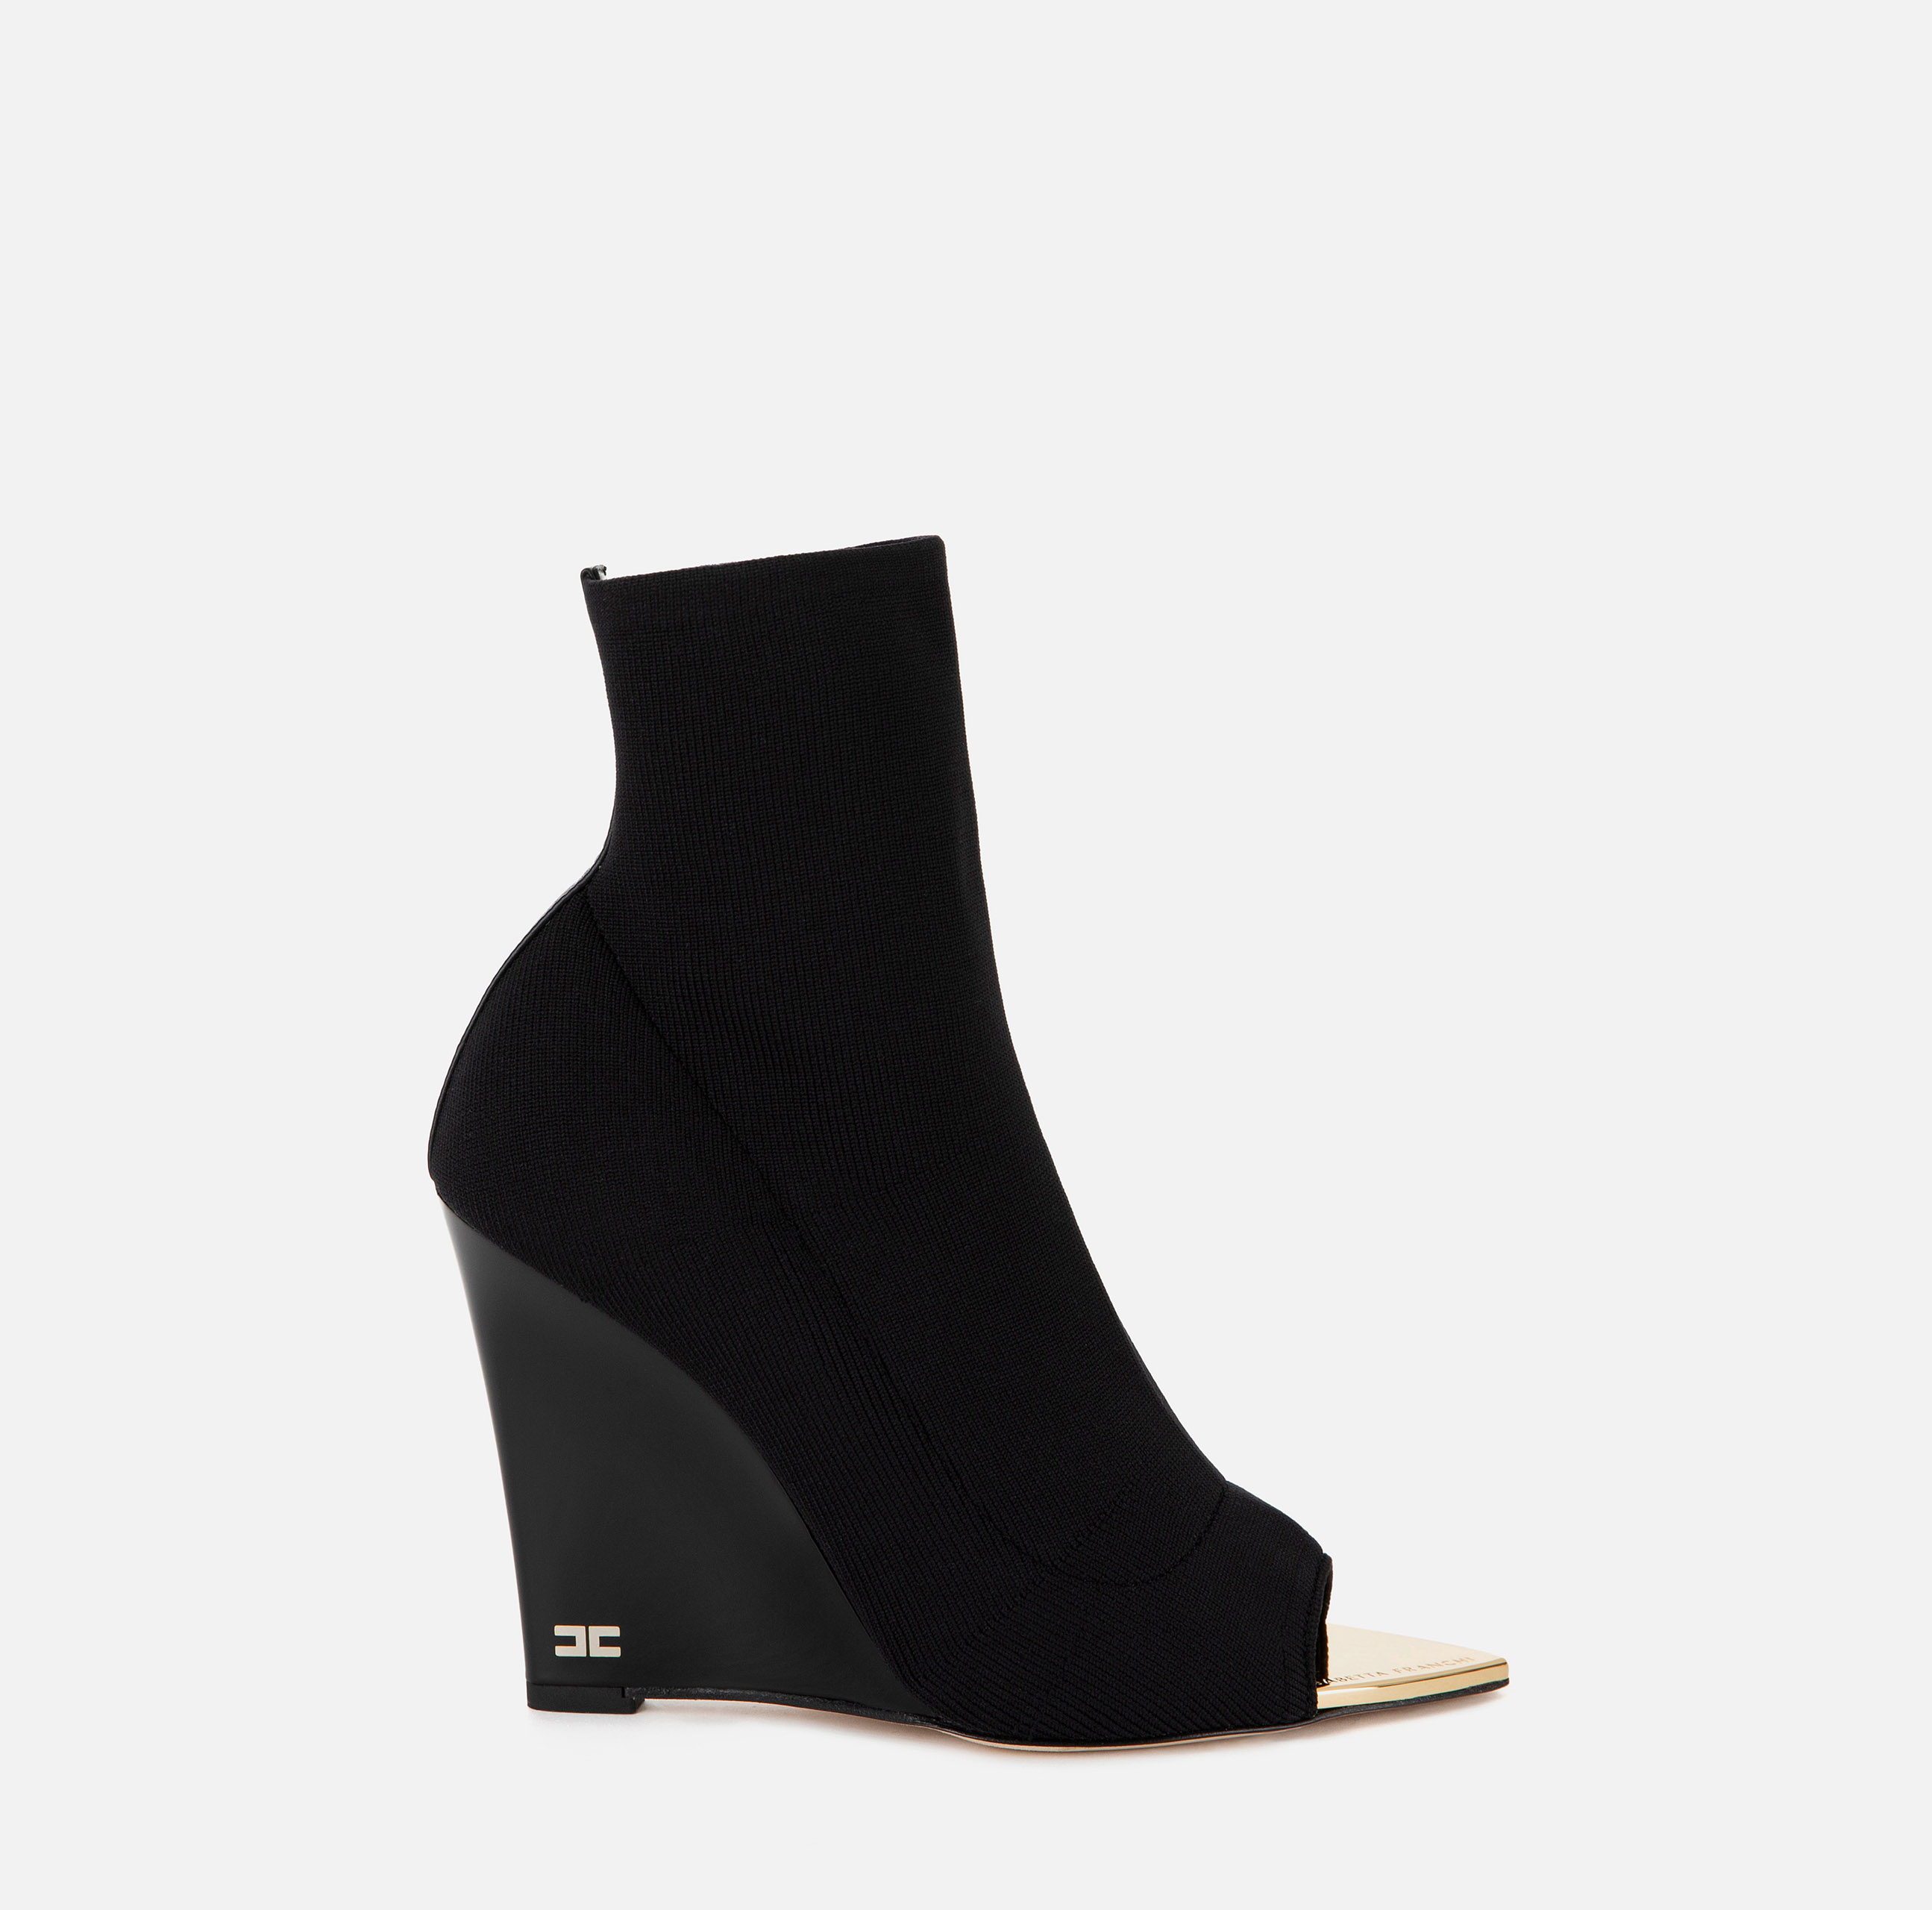 Knit ankle boot with wedge and open toe - SCARPE - Elisabetta Franchi